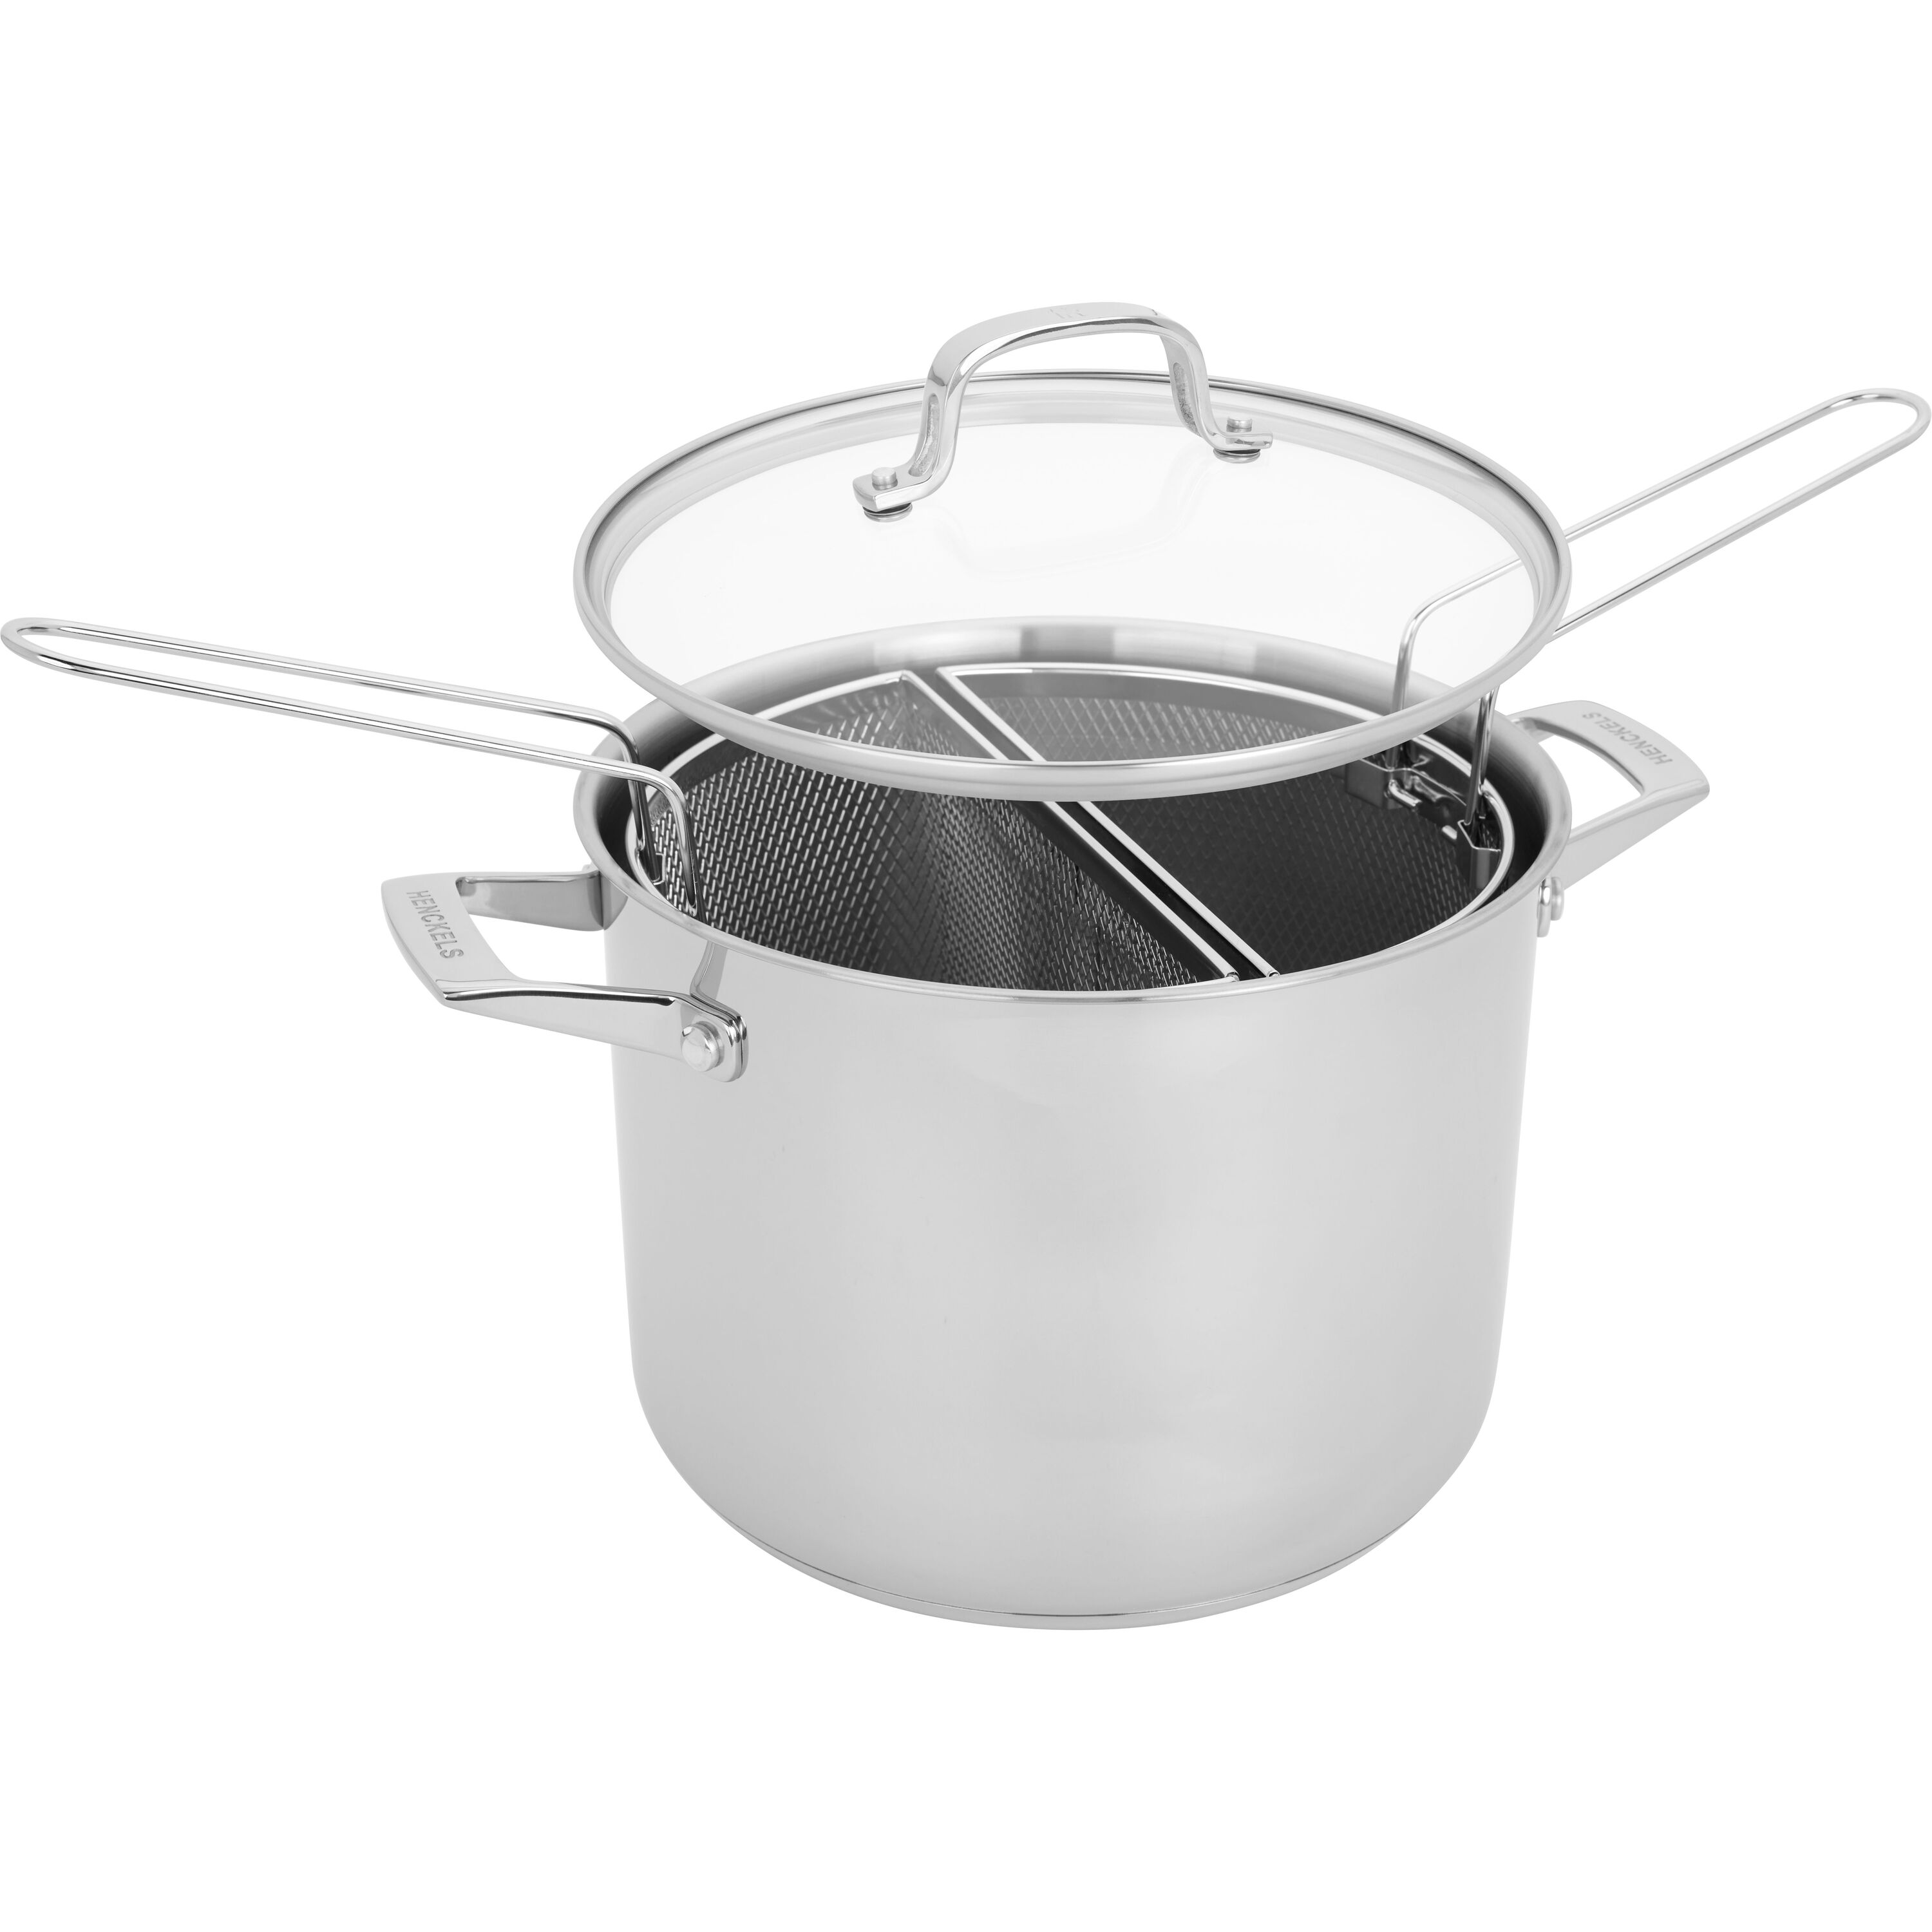 All-Clad Stainless Steel 6 qt. Pasta Pot - Kitchen & Company